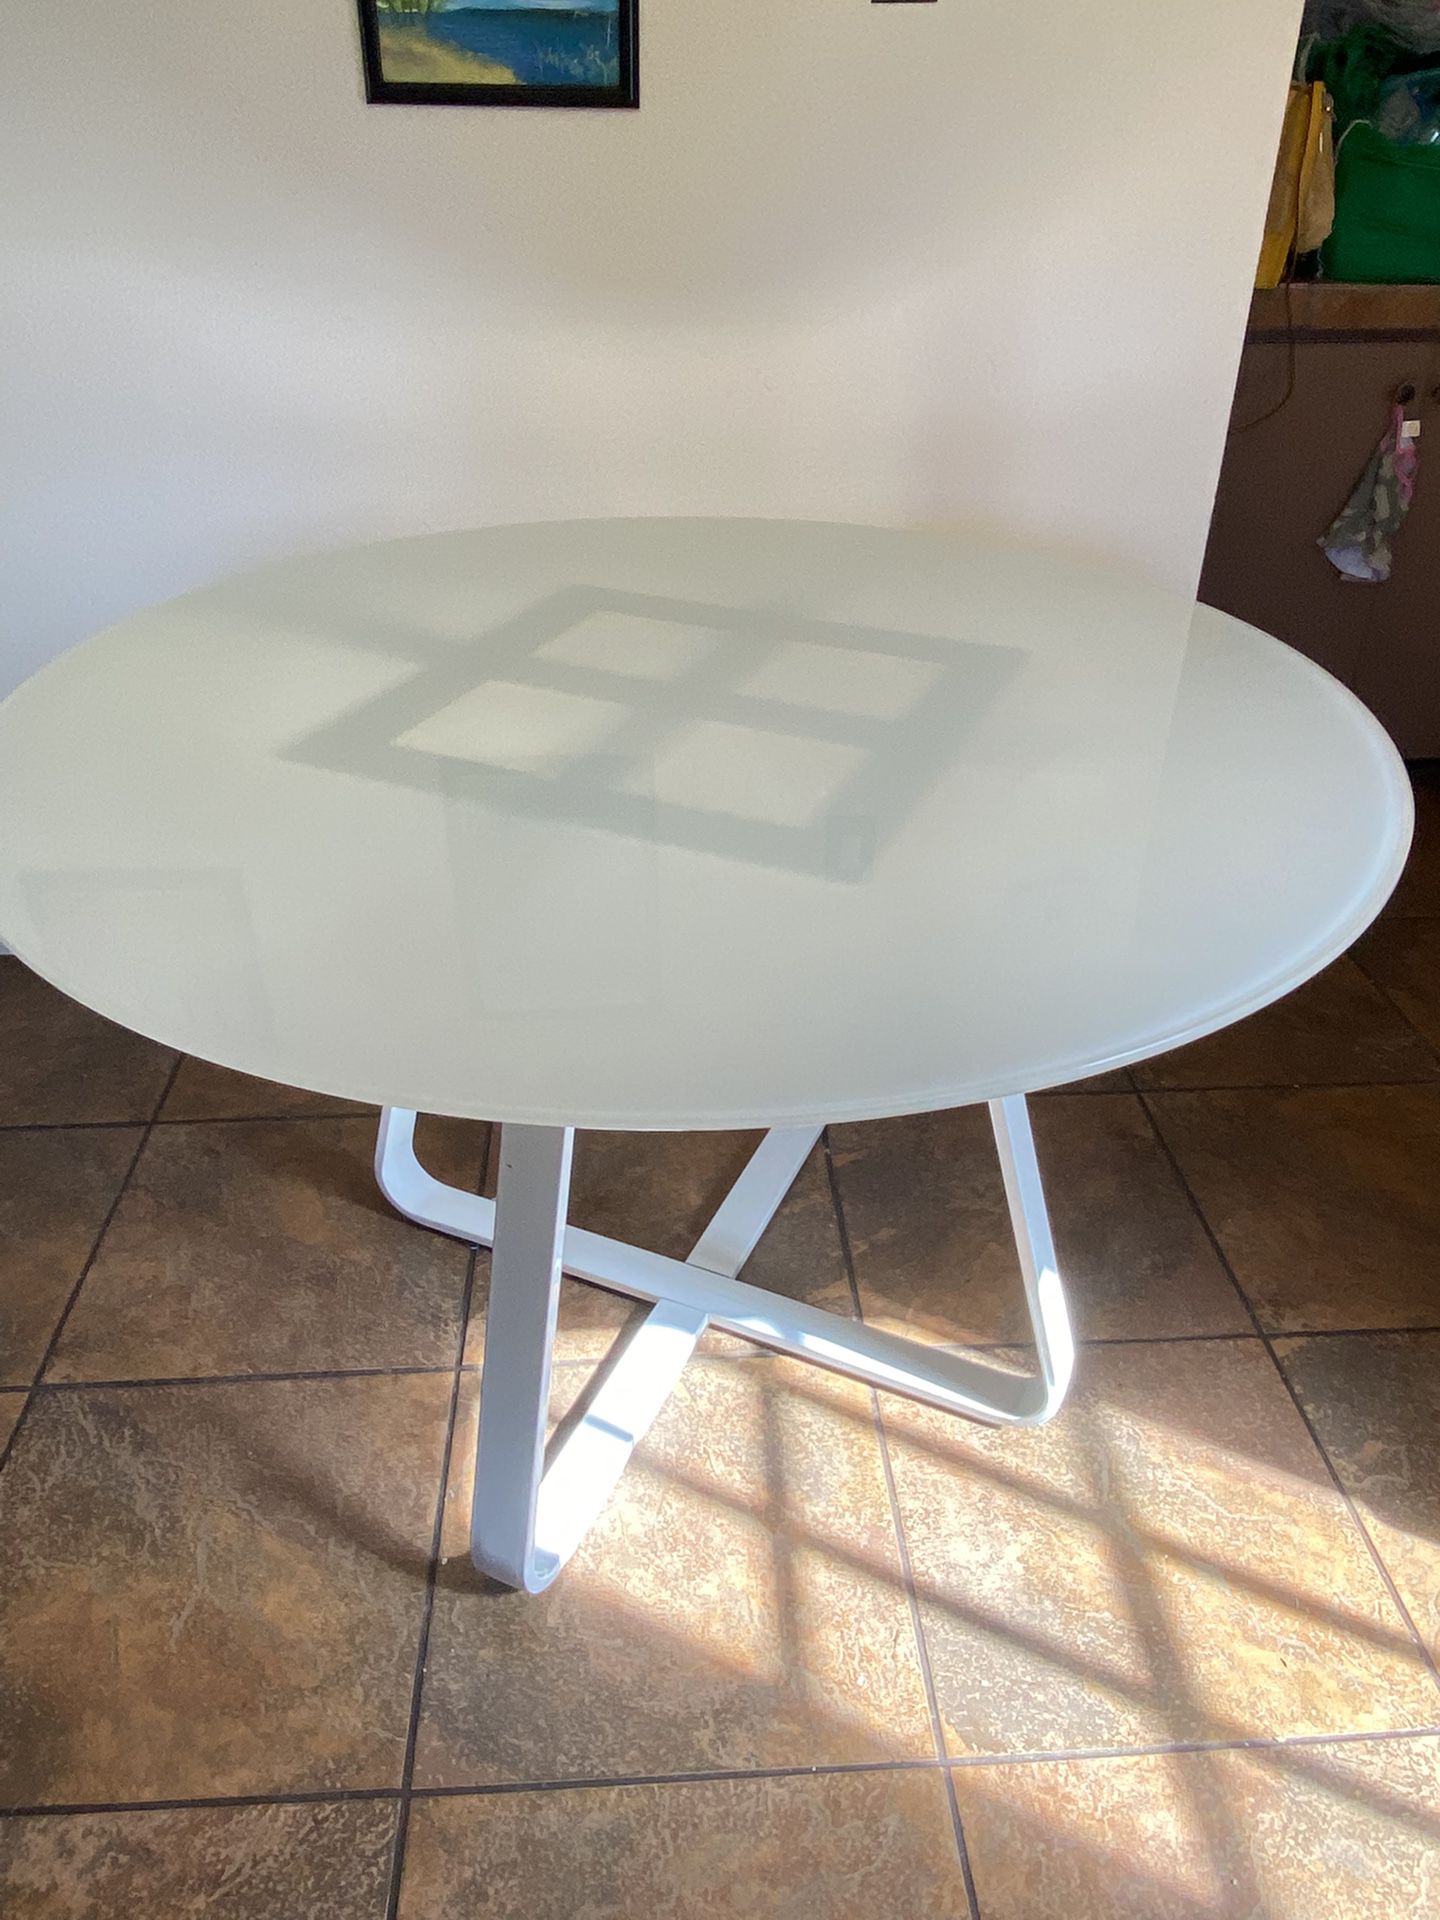 Glass Top Table - For Indoors/Outdoors